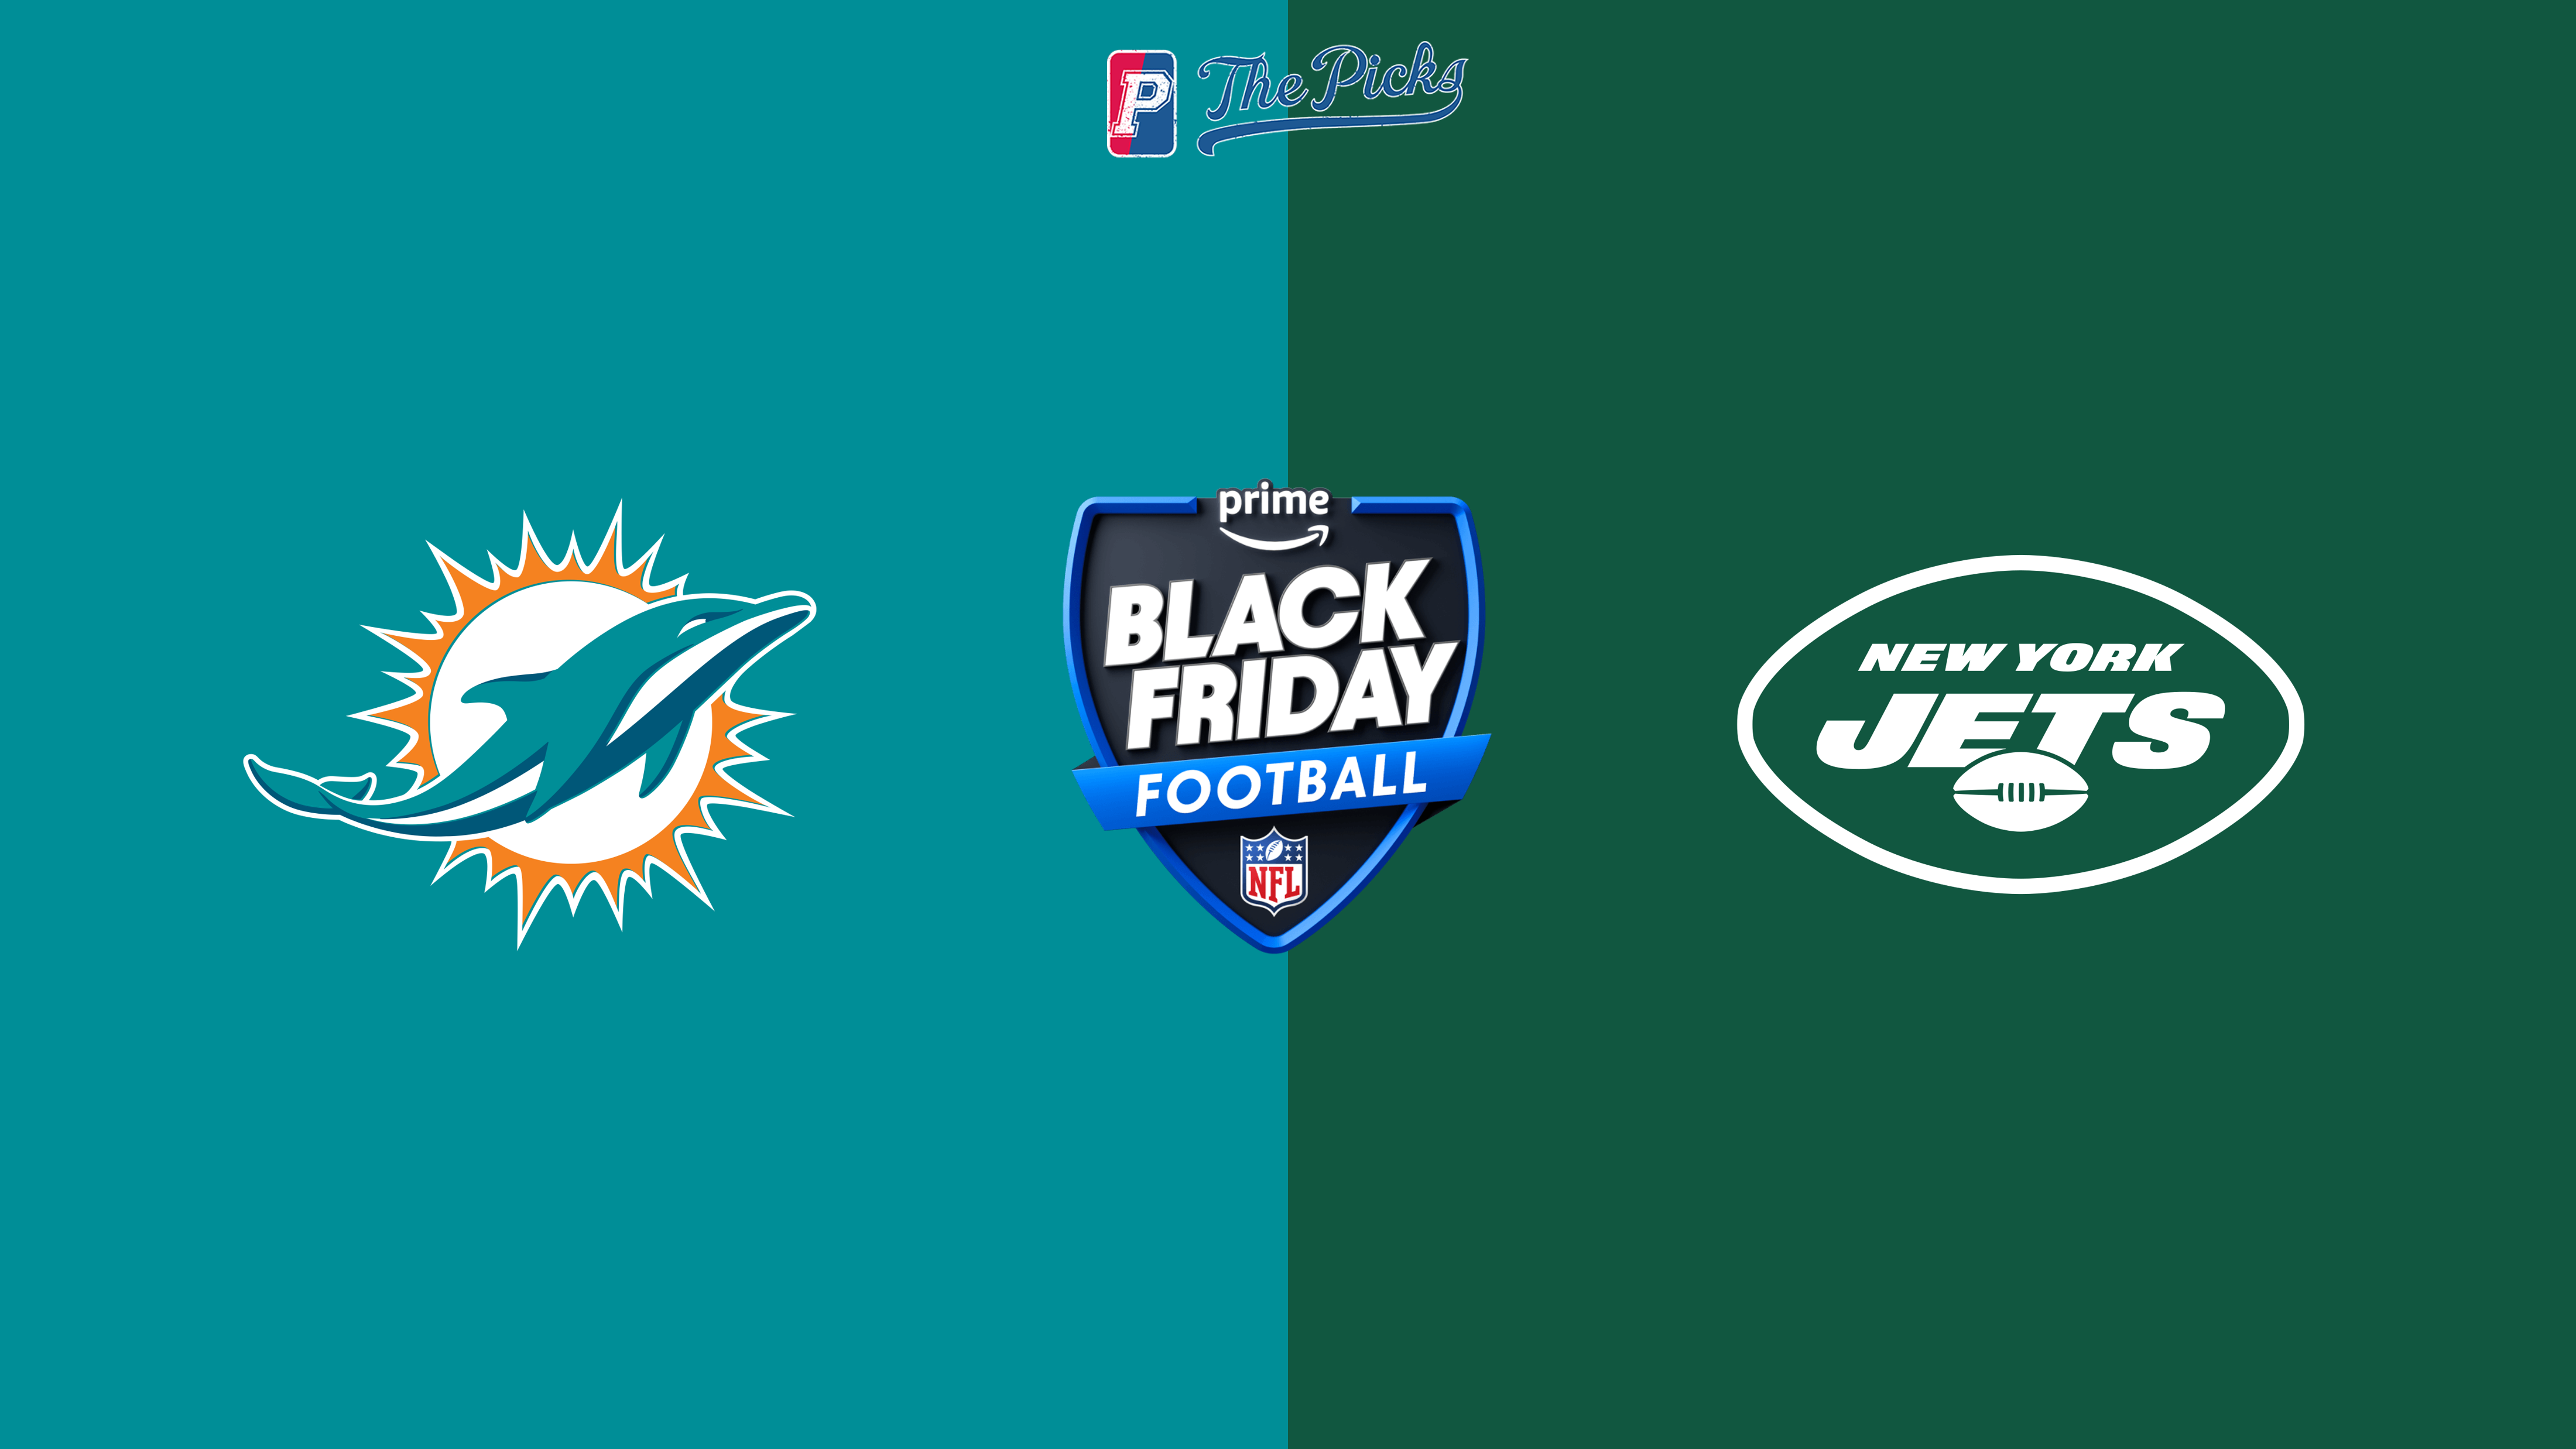 Dolphins and Jets playing on first-ever Black Friday Football